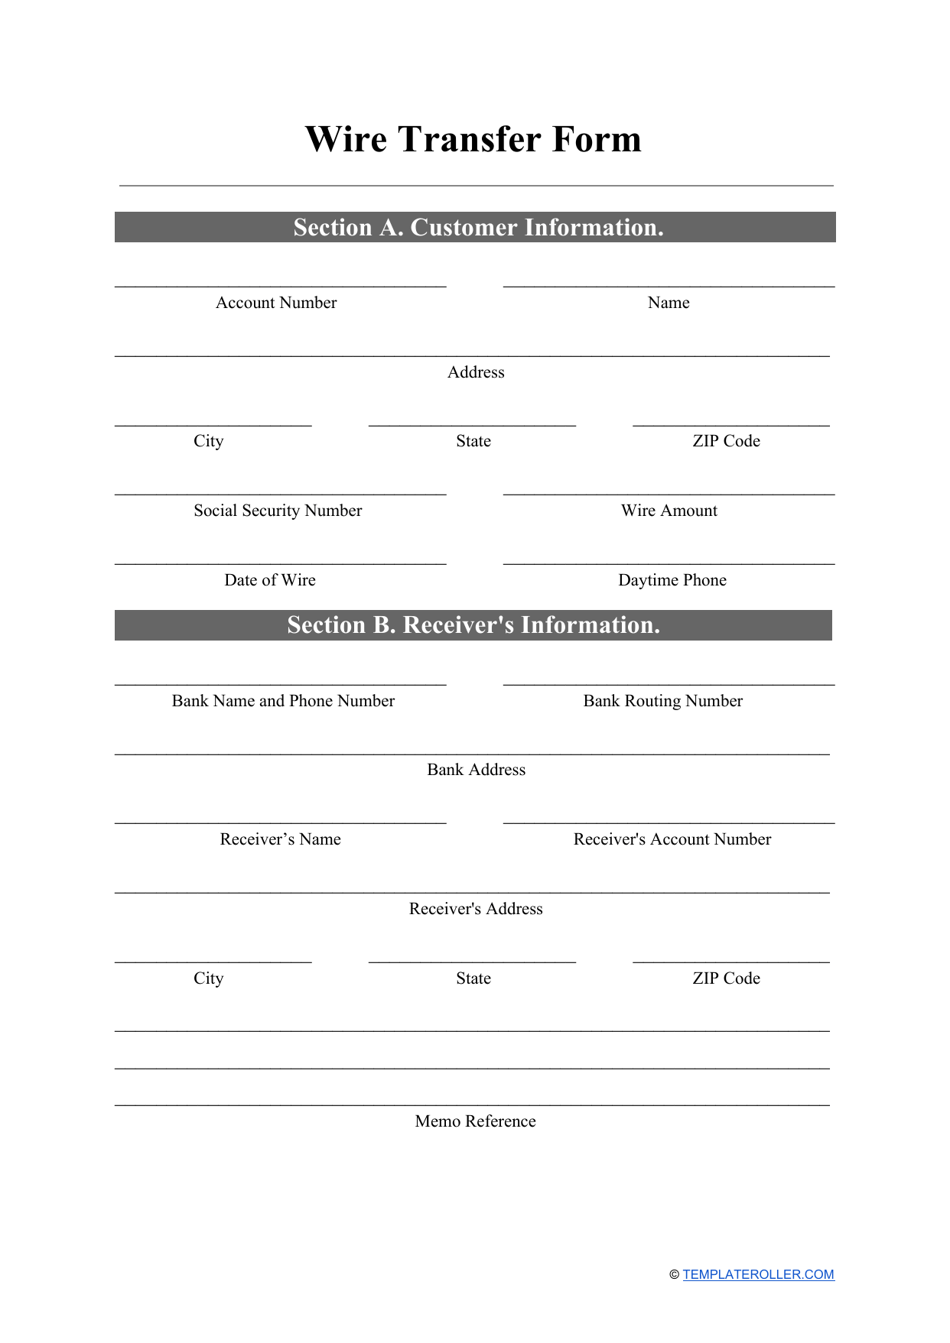 Wire Transfer Form Download Printable PDF Templateroller